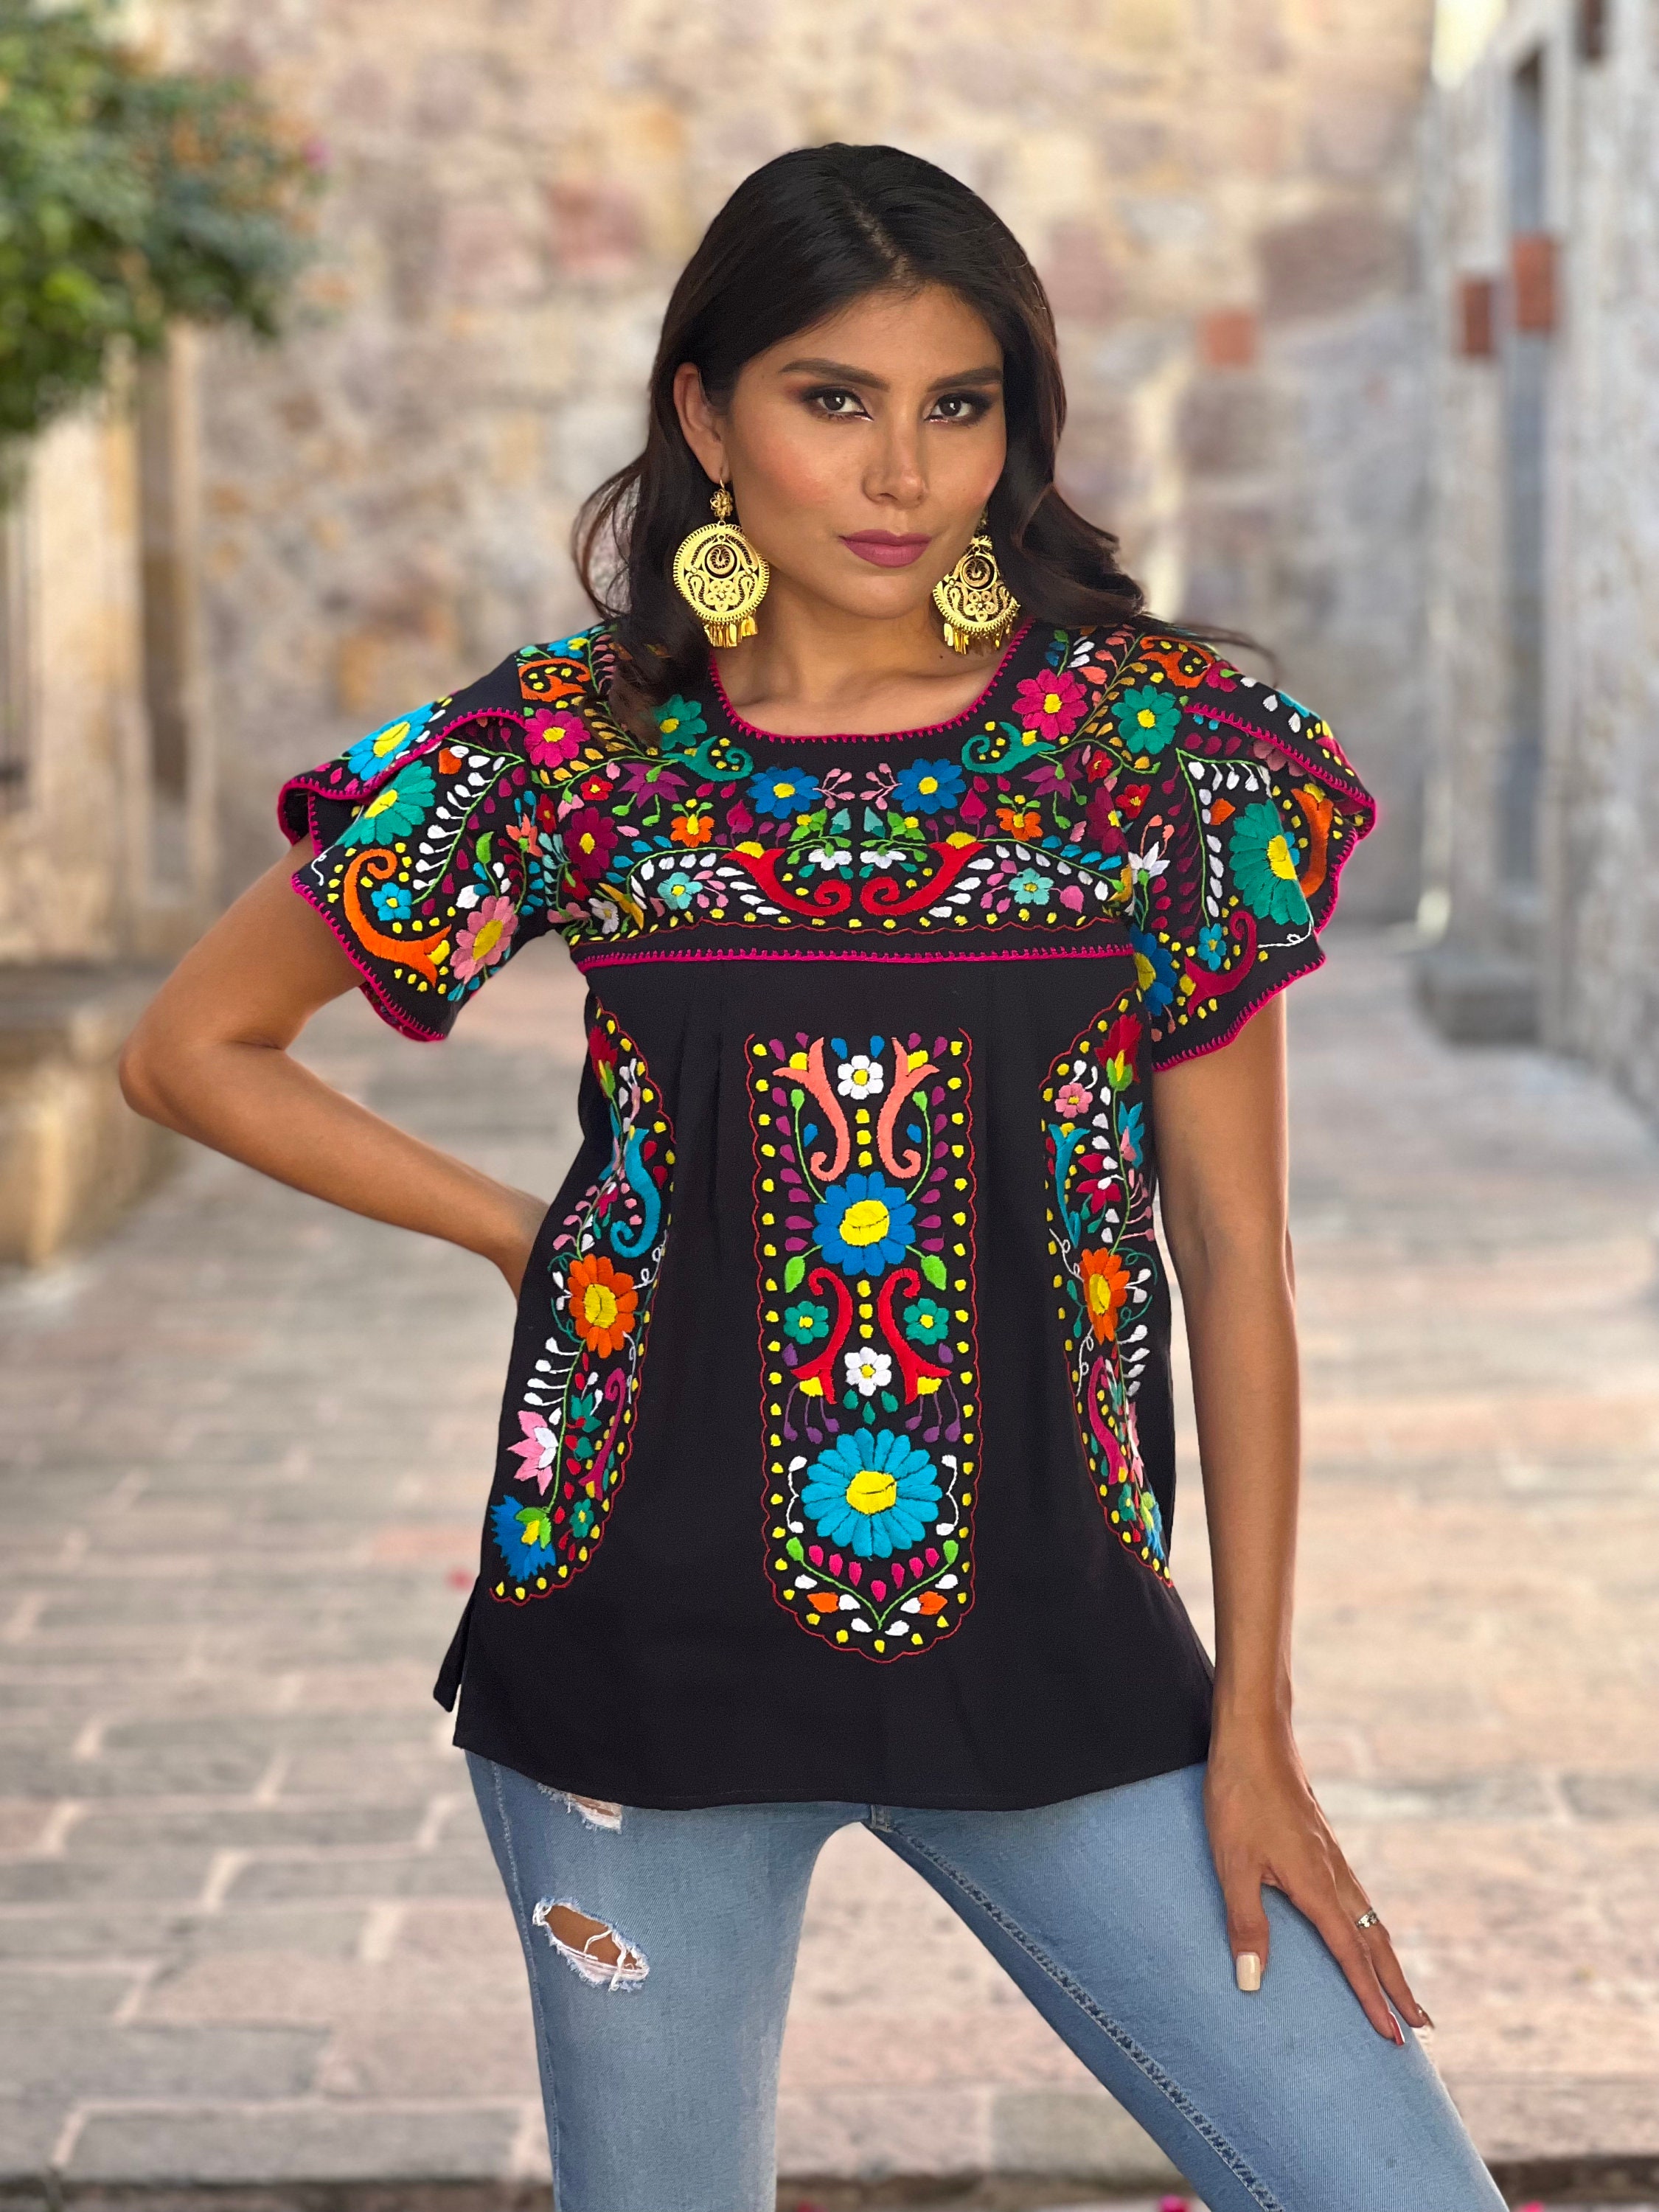 Solei & Ethnic Hand Embroidered Multicolor Blouse. Floral Mexican Blouse. Mexican Traditional Blouse. Artisanal Mexican Blouse. Split Sleeve Top.